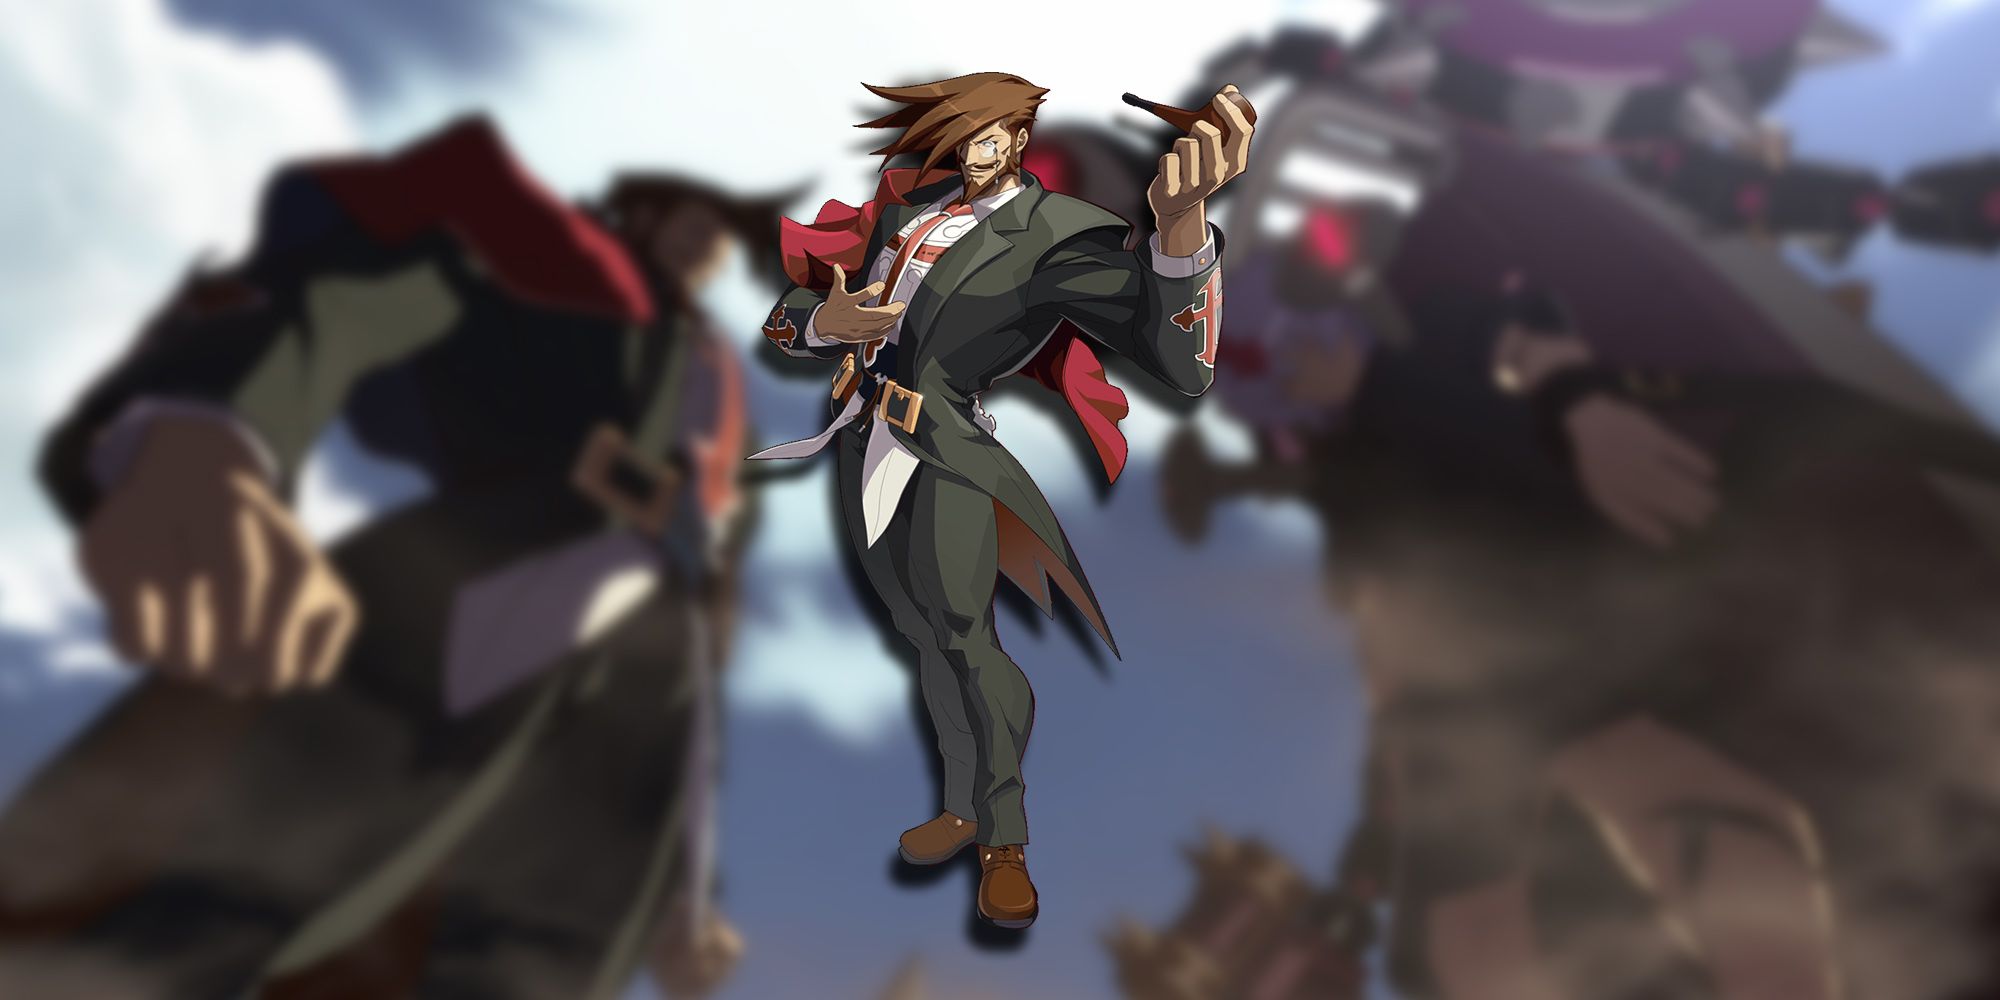 PNG Of Slayer From Guilty Gear Franchise Overlaid On Image Of Slayer And Bed-Man Staring Each Other Down